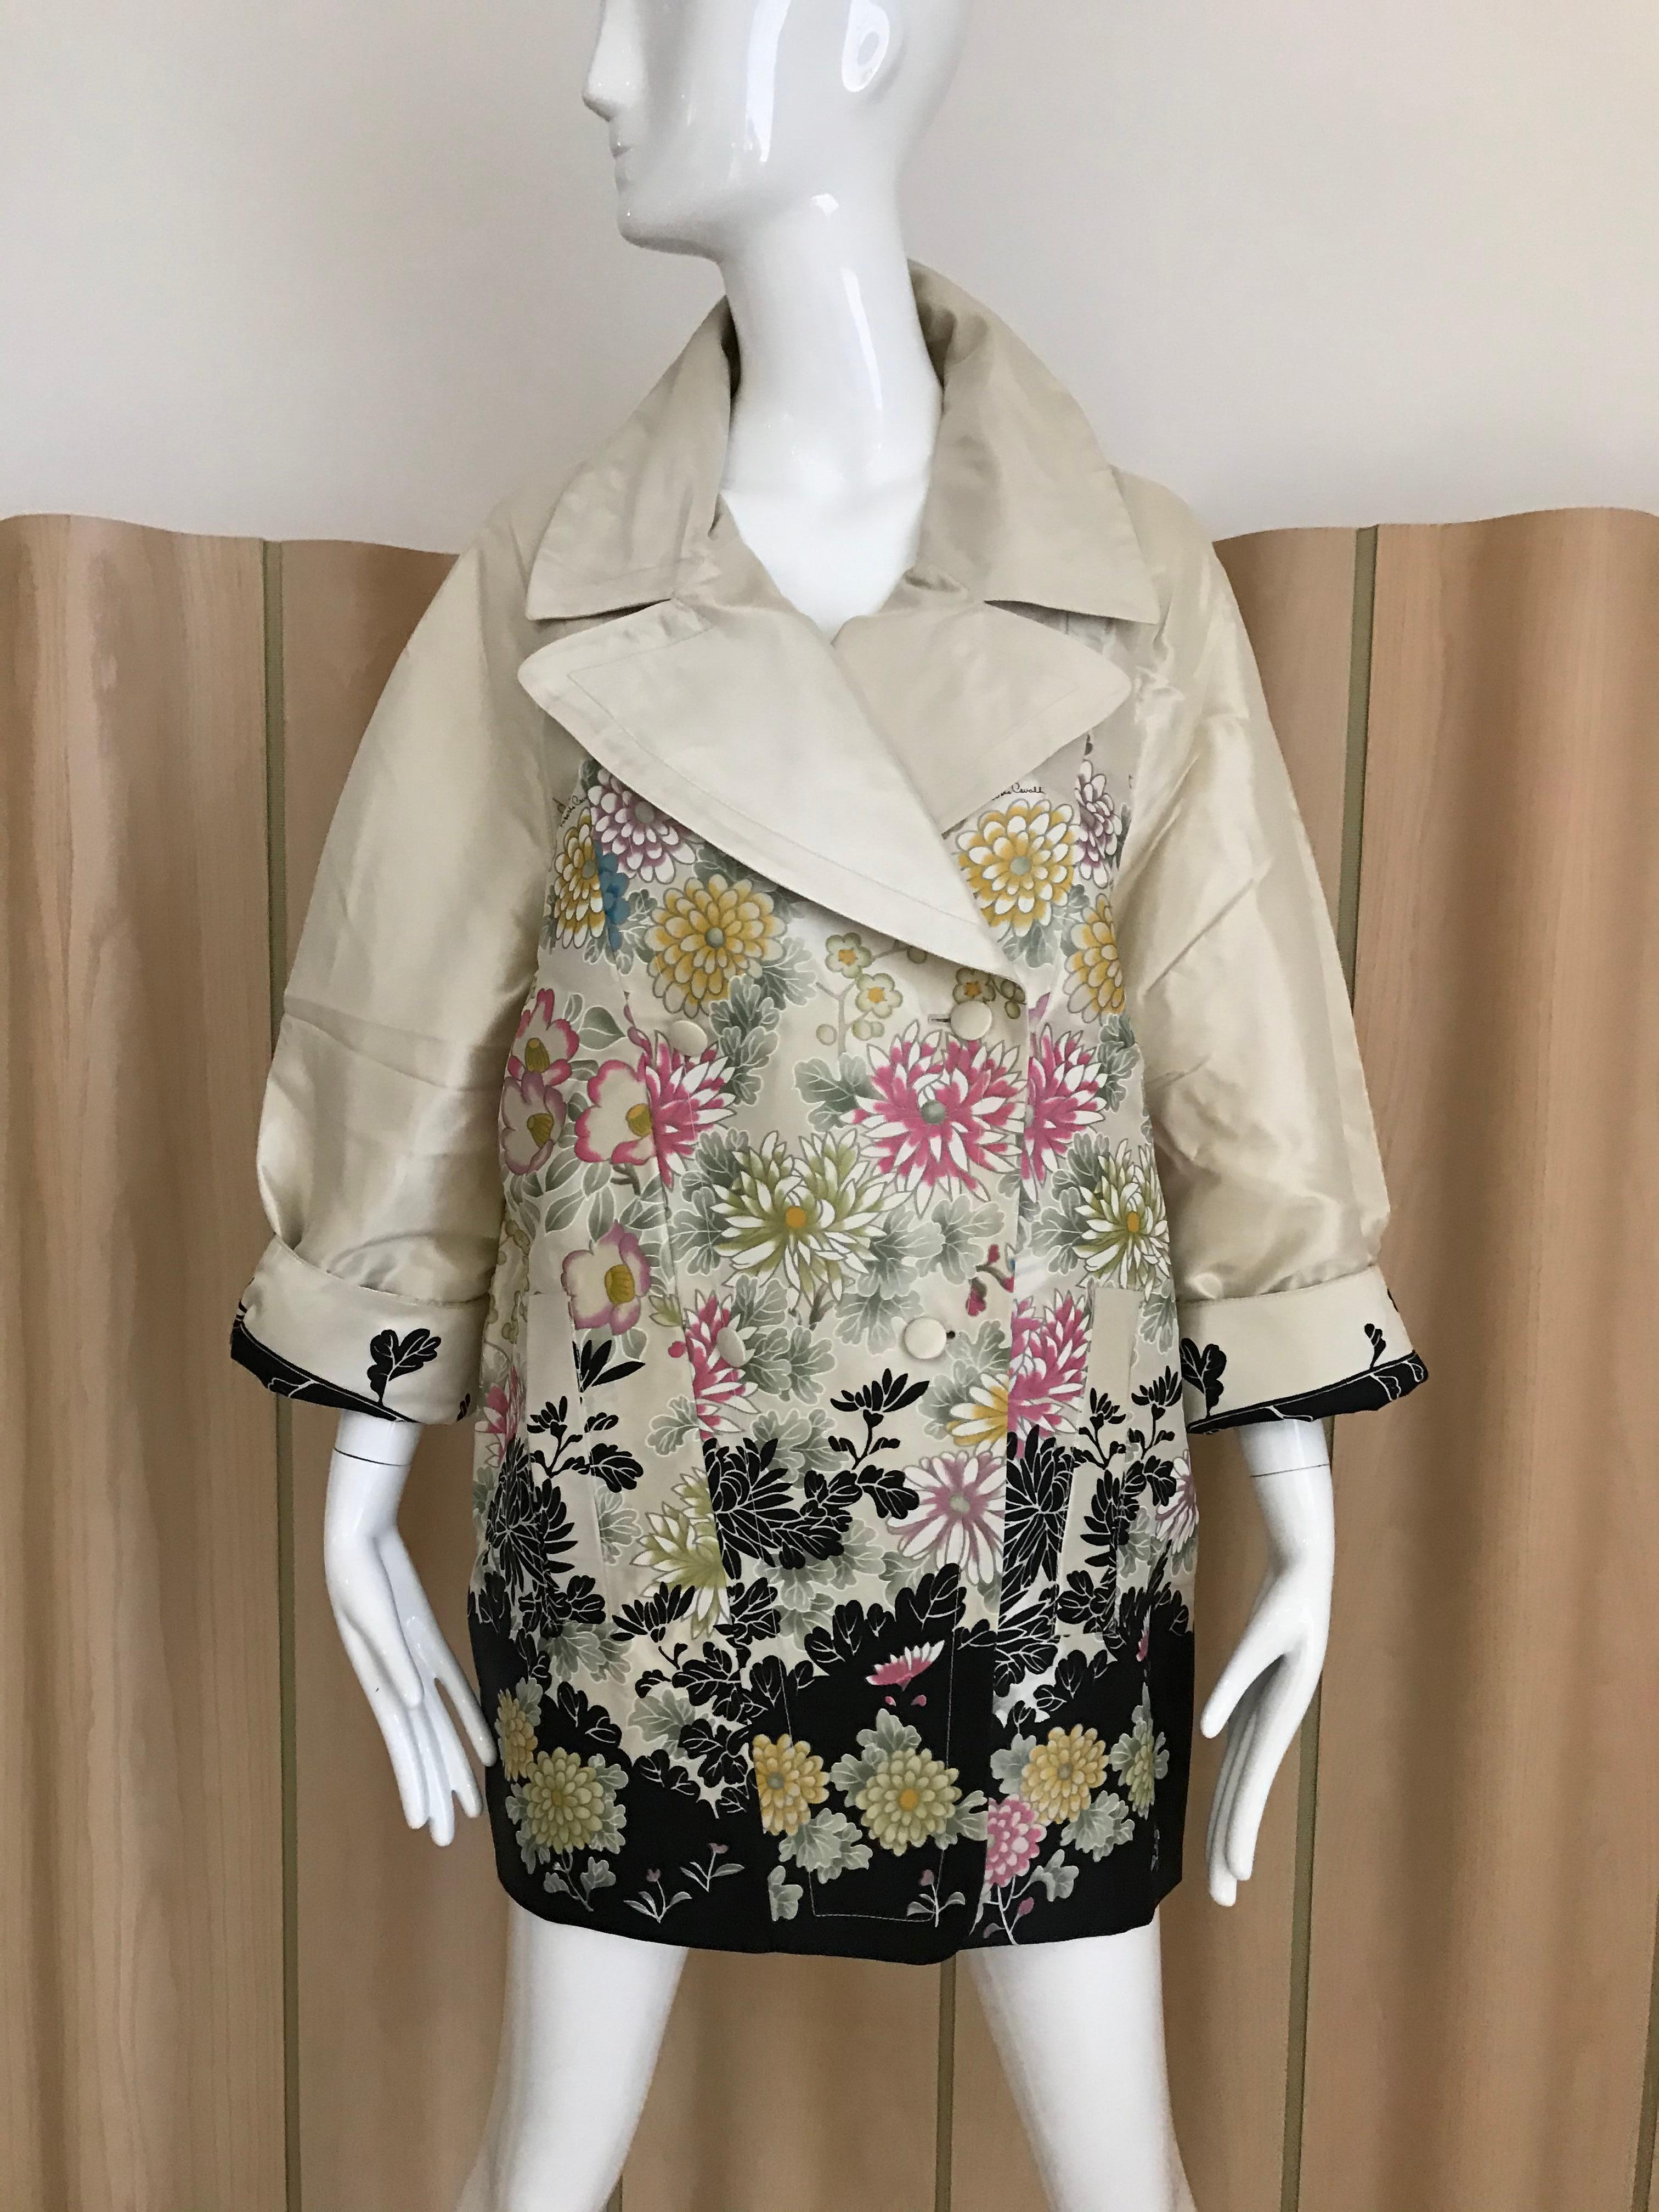 Roberto Cavalli Silk Creme coat with multi color floral prin in pink, green, Creme and yellow. Coat is brand new with Tag ($4760)
Size: 38italy 
Coat Length: 34